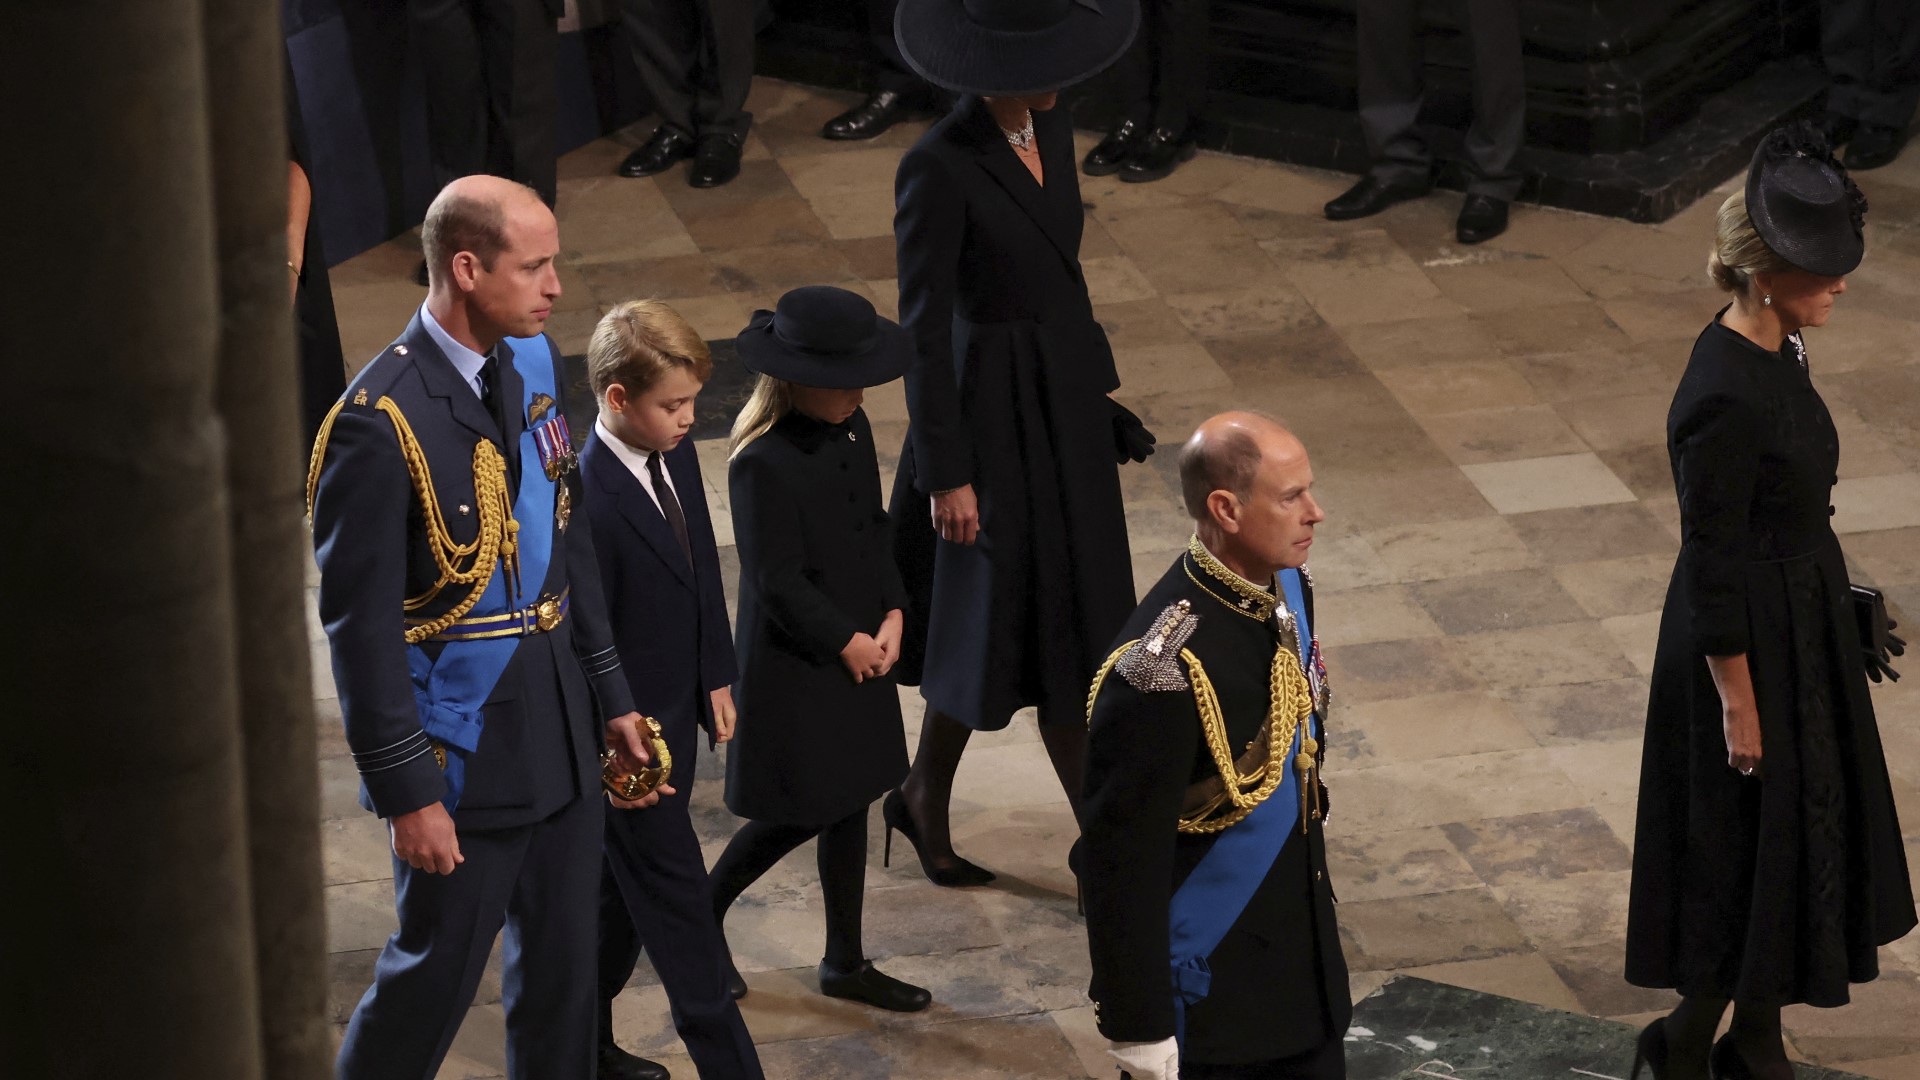 Britain’s royal family, along with hundreds of world leaders and dignitaries gathered at the Gothic abbey in London for the service Monday.